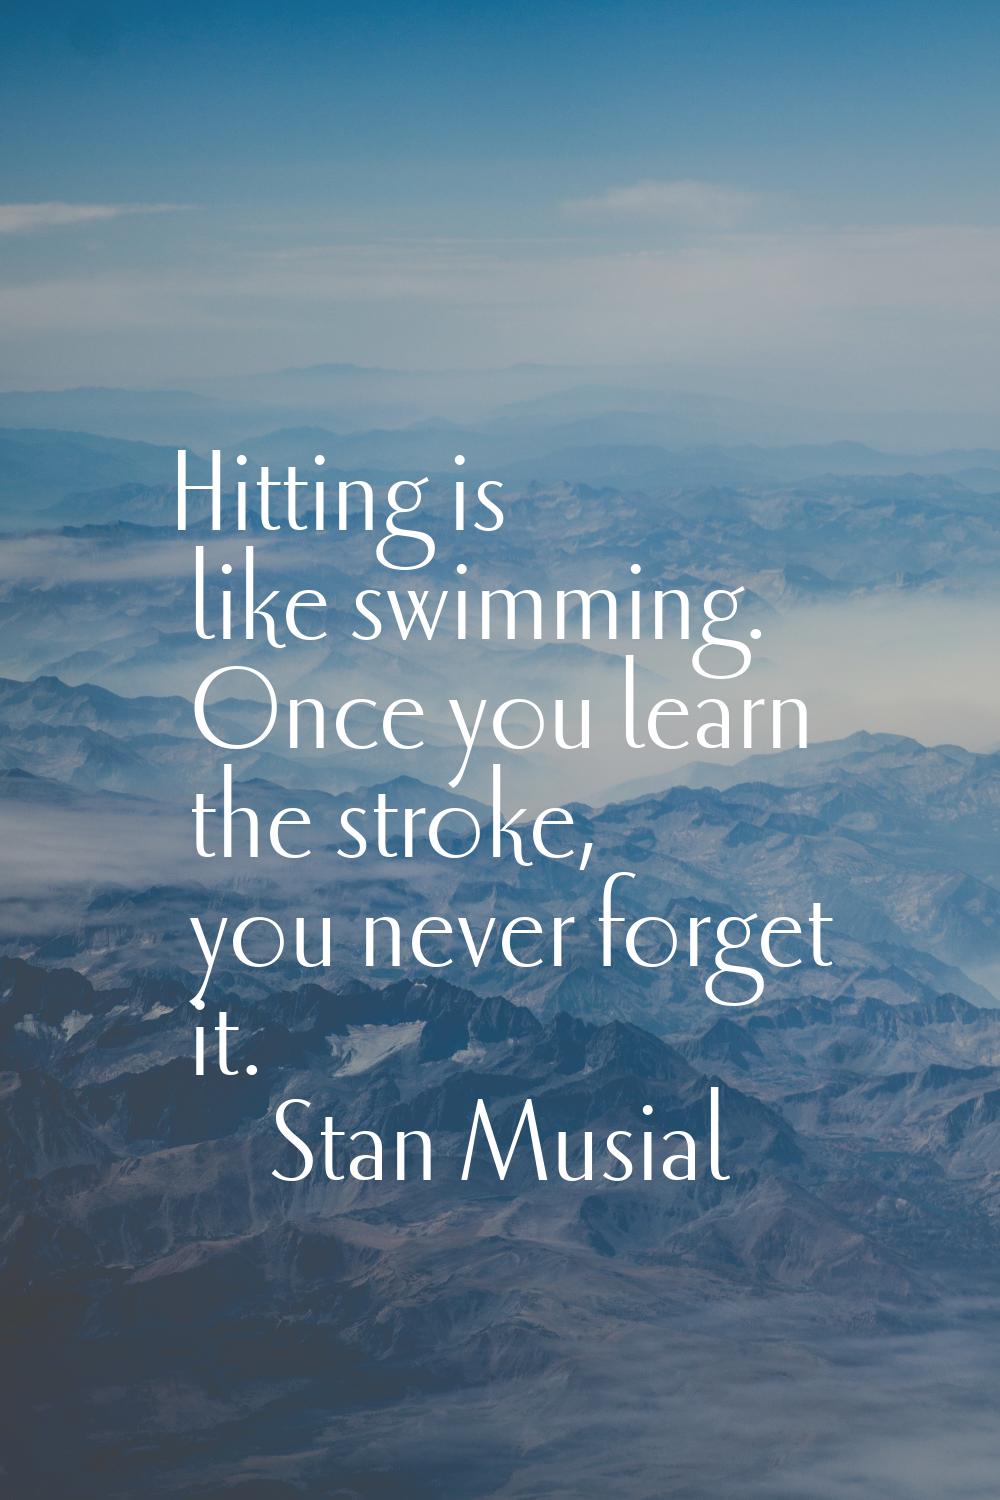 Hitting is like swimming. Once you learn the stroke, you never forget it.